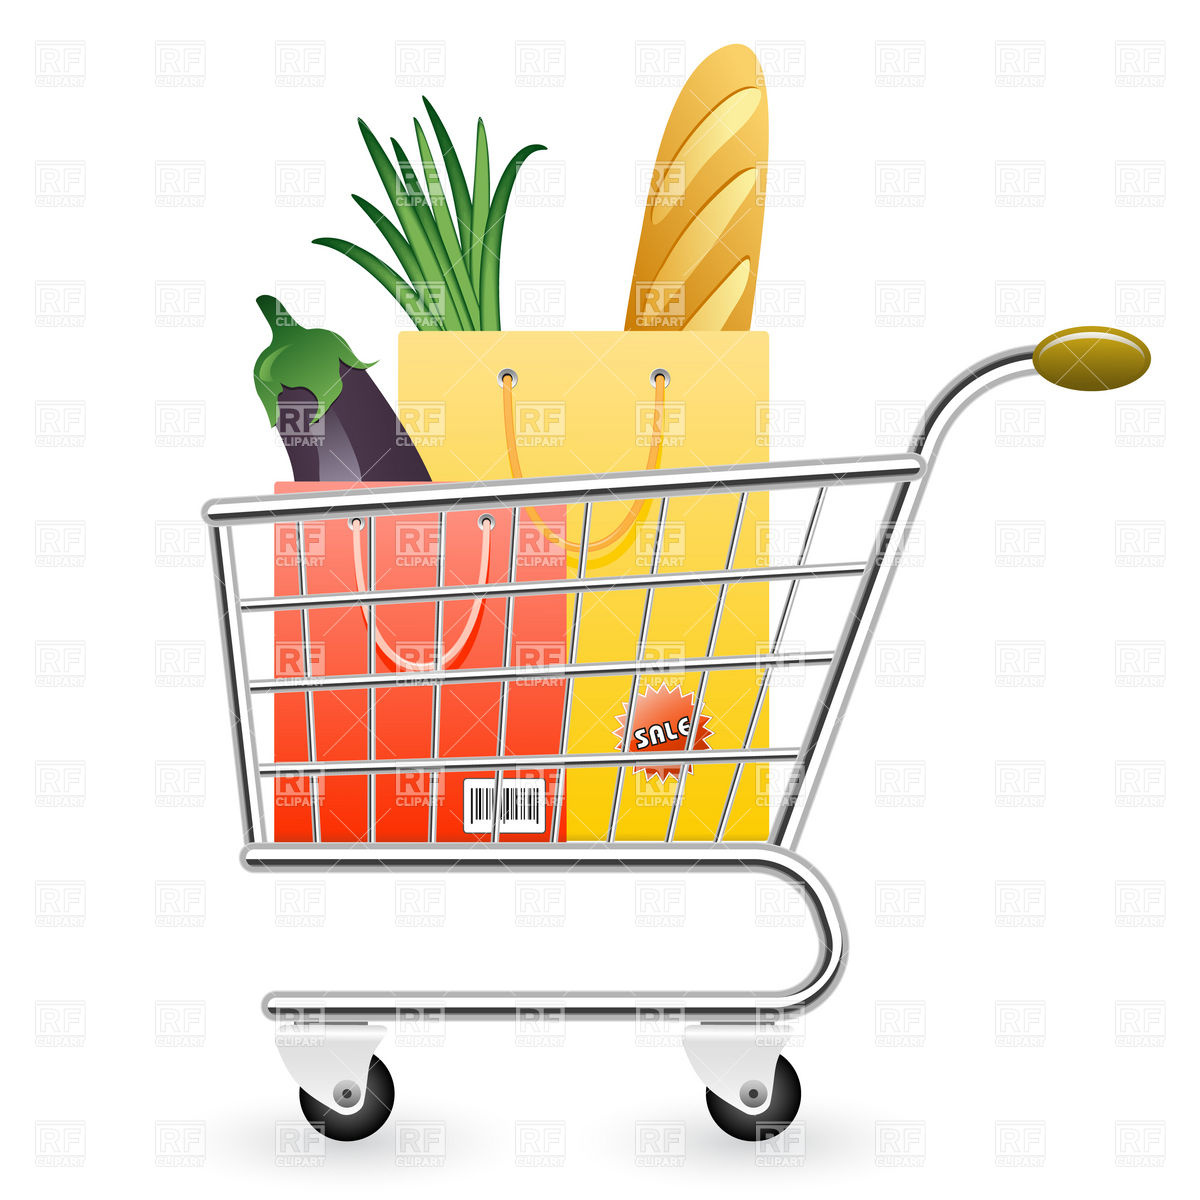 Shopping Cart Full Of Products 5932 Objects Download Royalty Free